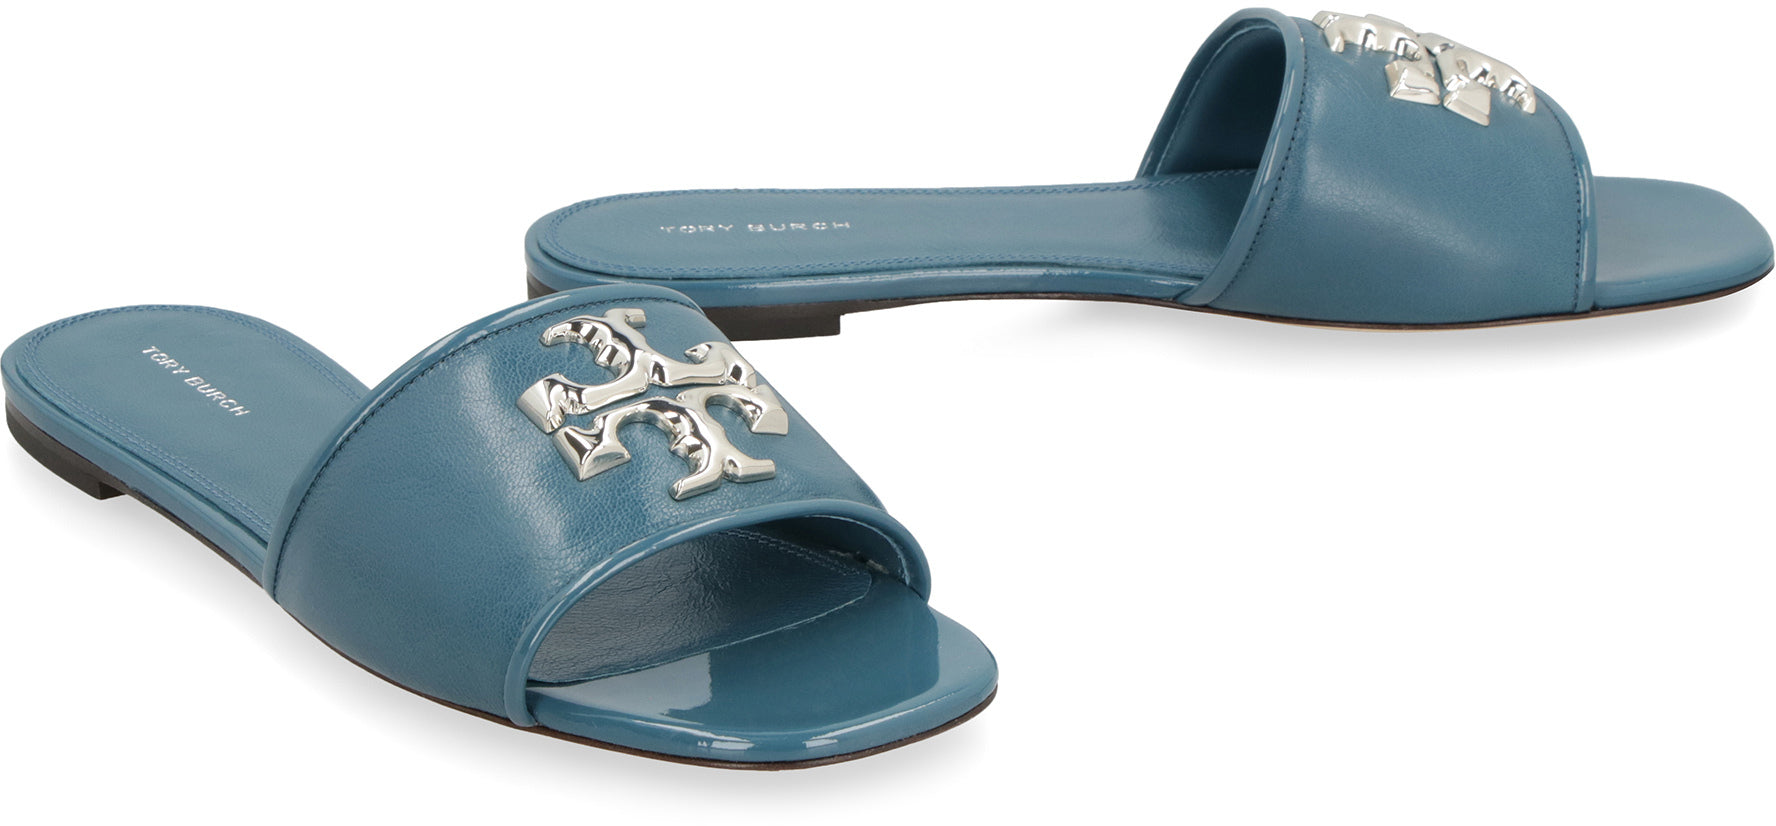 Tory Burch - Eleanor leather slides with logo green - The Corner